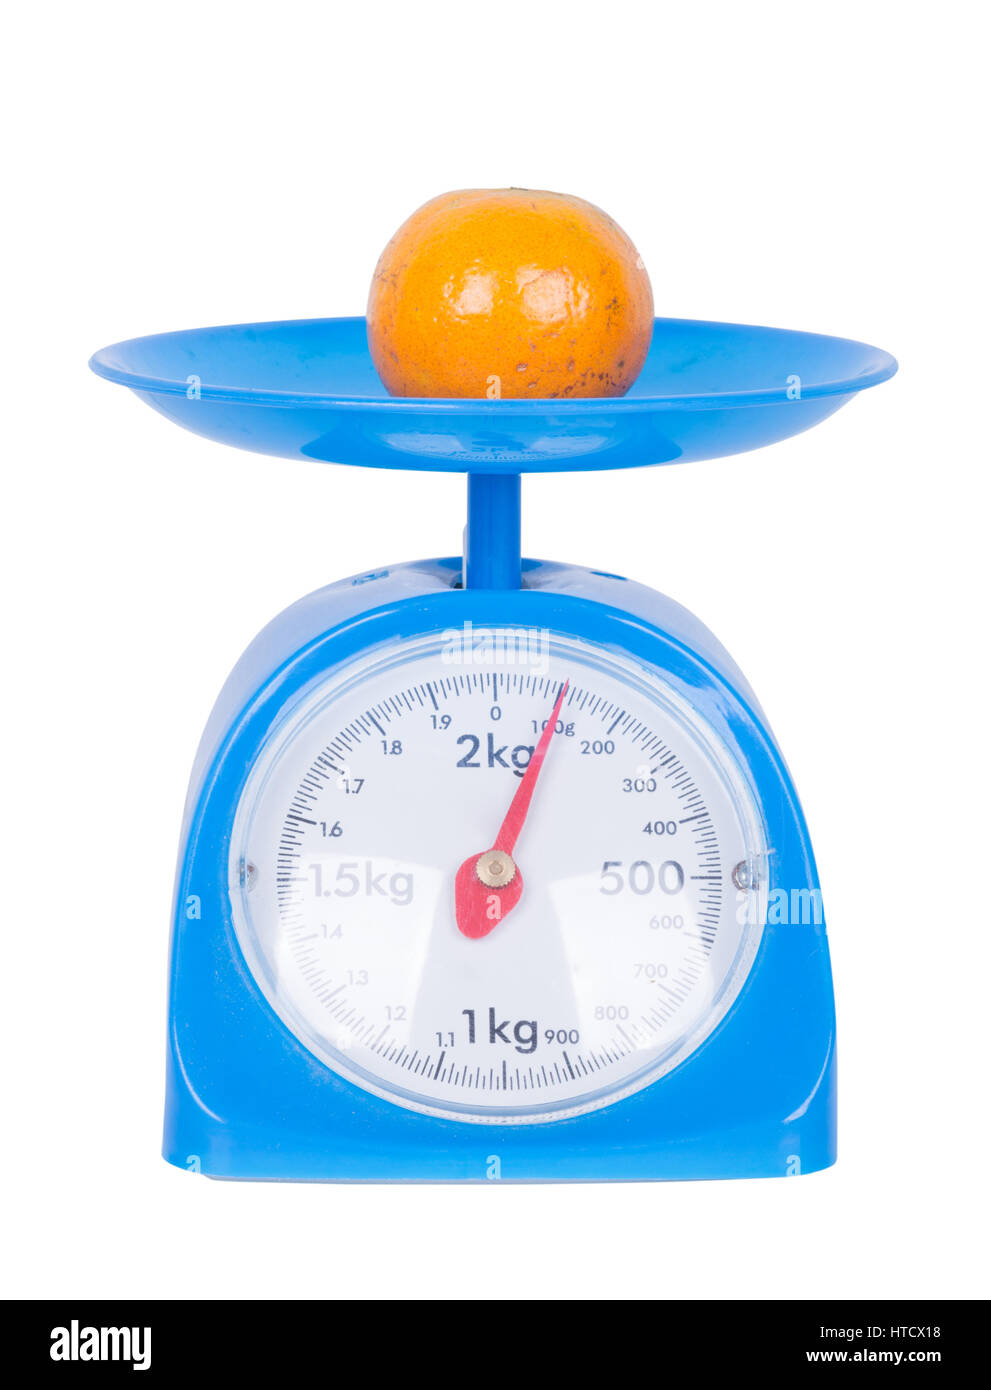 https://c8.alamy.com/comp/HTCX18/orange-on-kitchen-scale-isolated-on-white-background-with-clipping-HTCX18.jpg